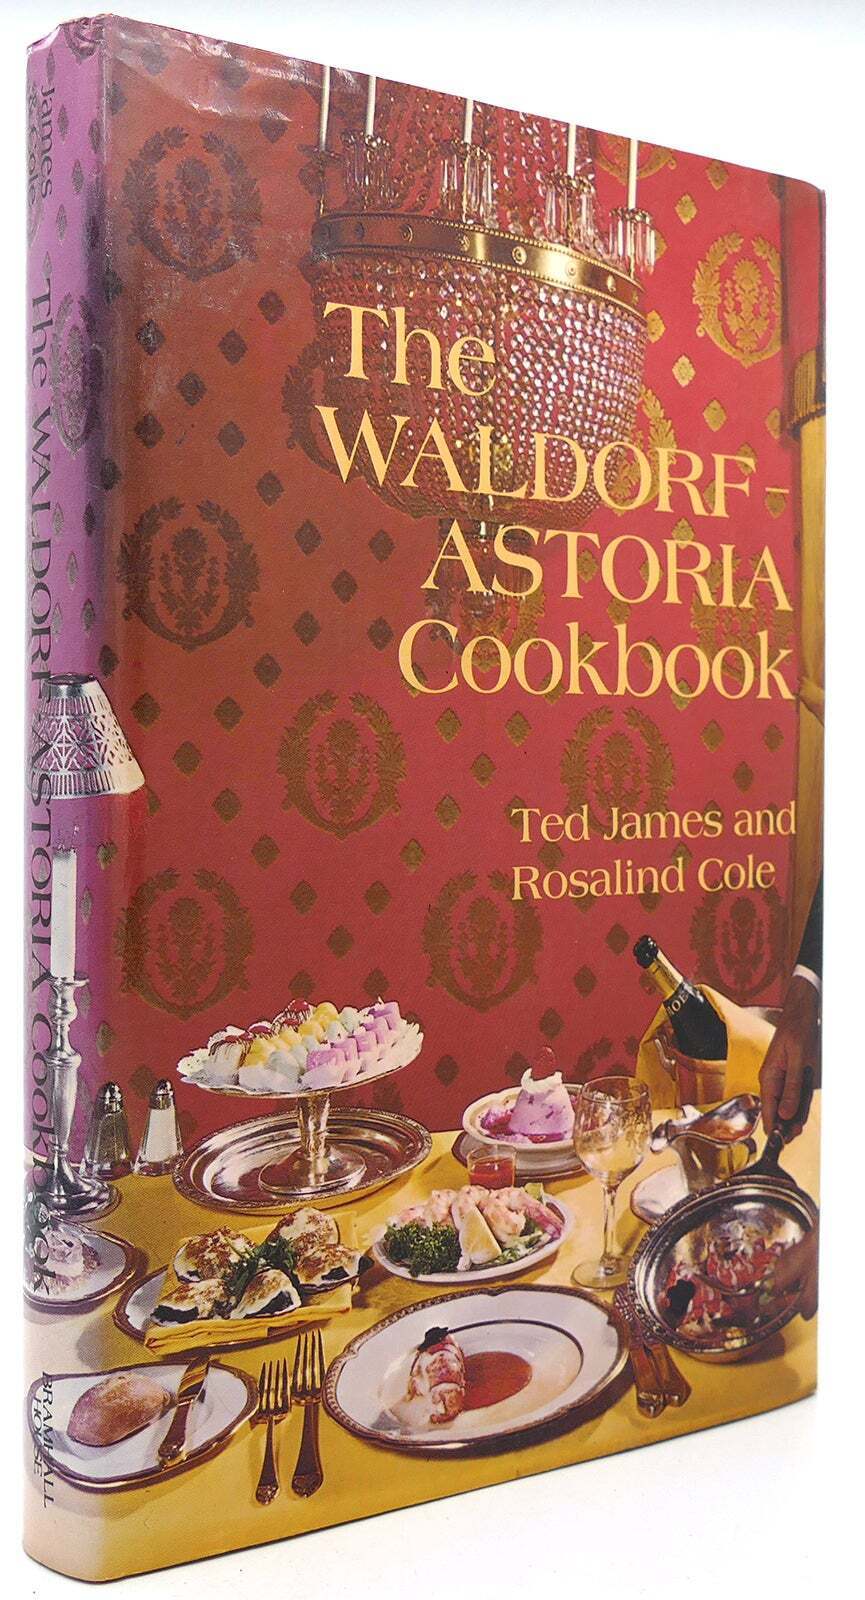 Ted James, Rosalind Cole WALDORF ASTORIA COOKBOOK 50 Gld An 1st Edition 2nd Prin